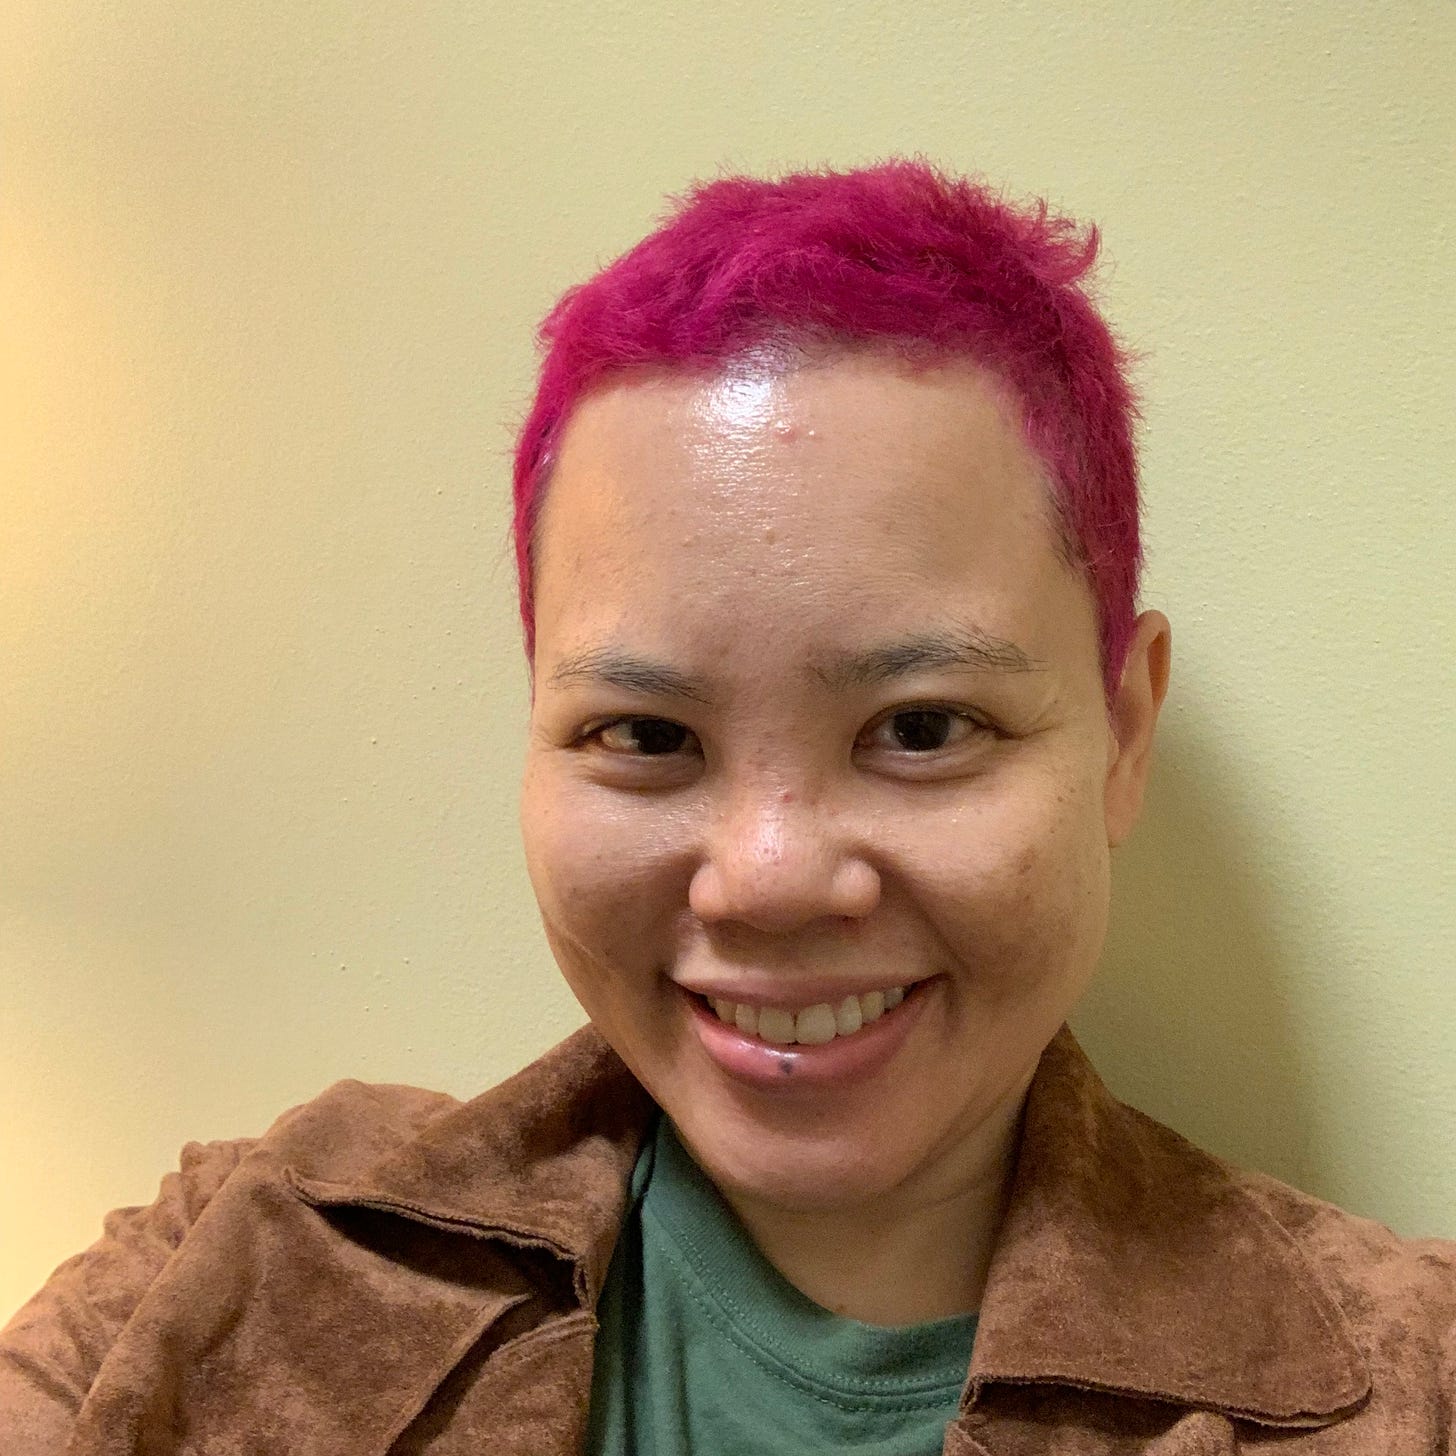 Selfie with short, pink hair